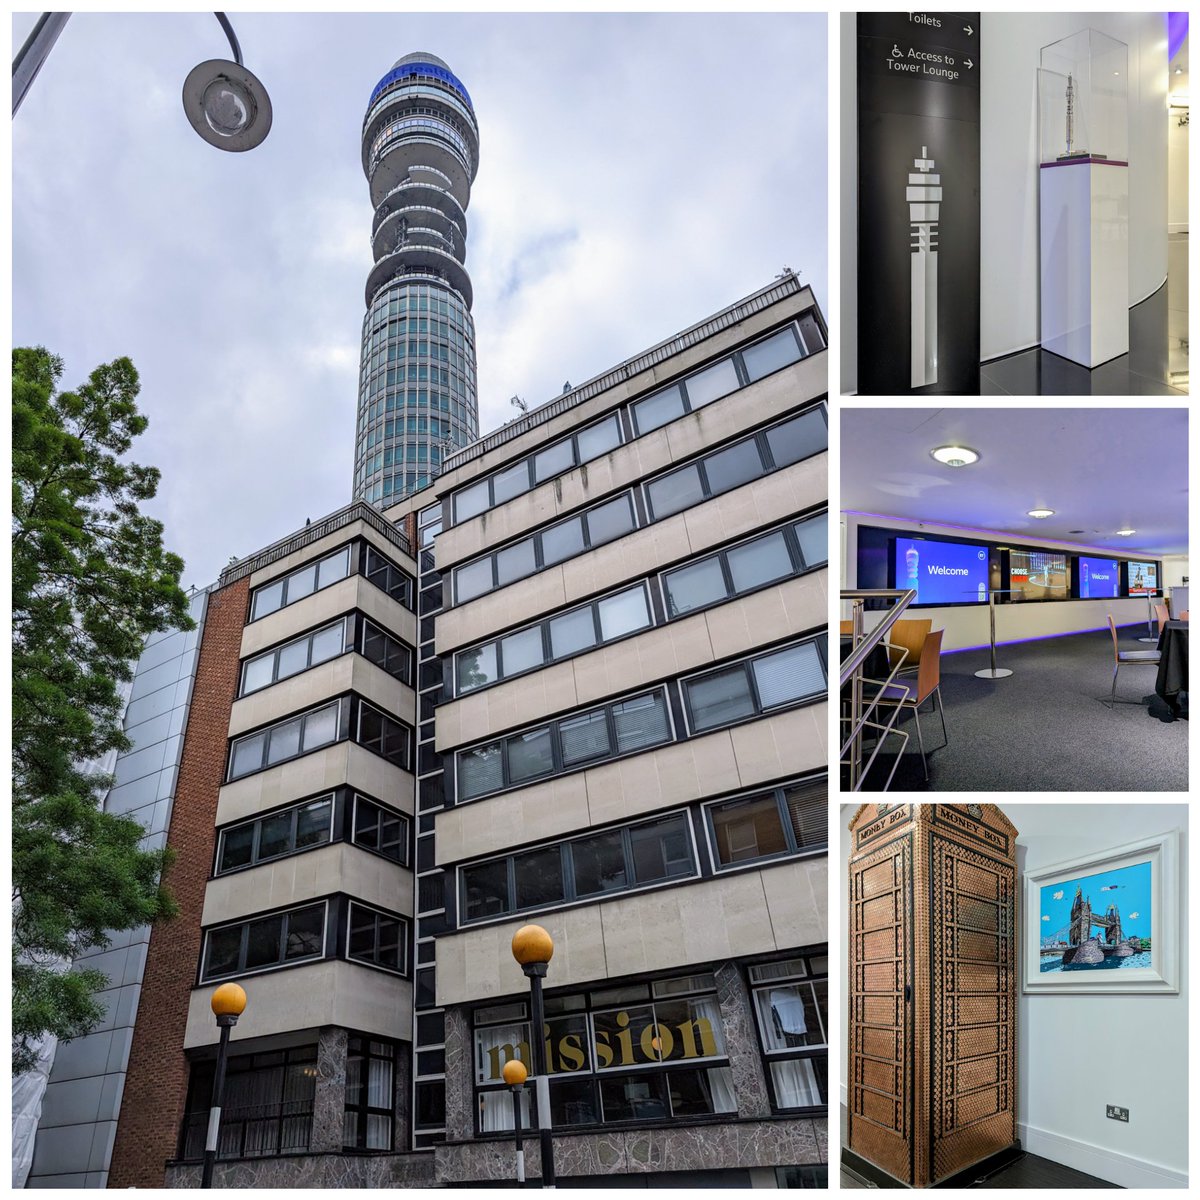 Today's office is @bttowerlondon - I'll be talking about the past, present, and future of telecommunications... #digital #5G #FTTP #satellitecommunications